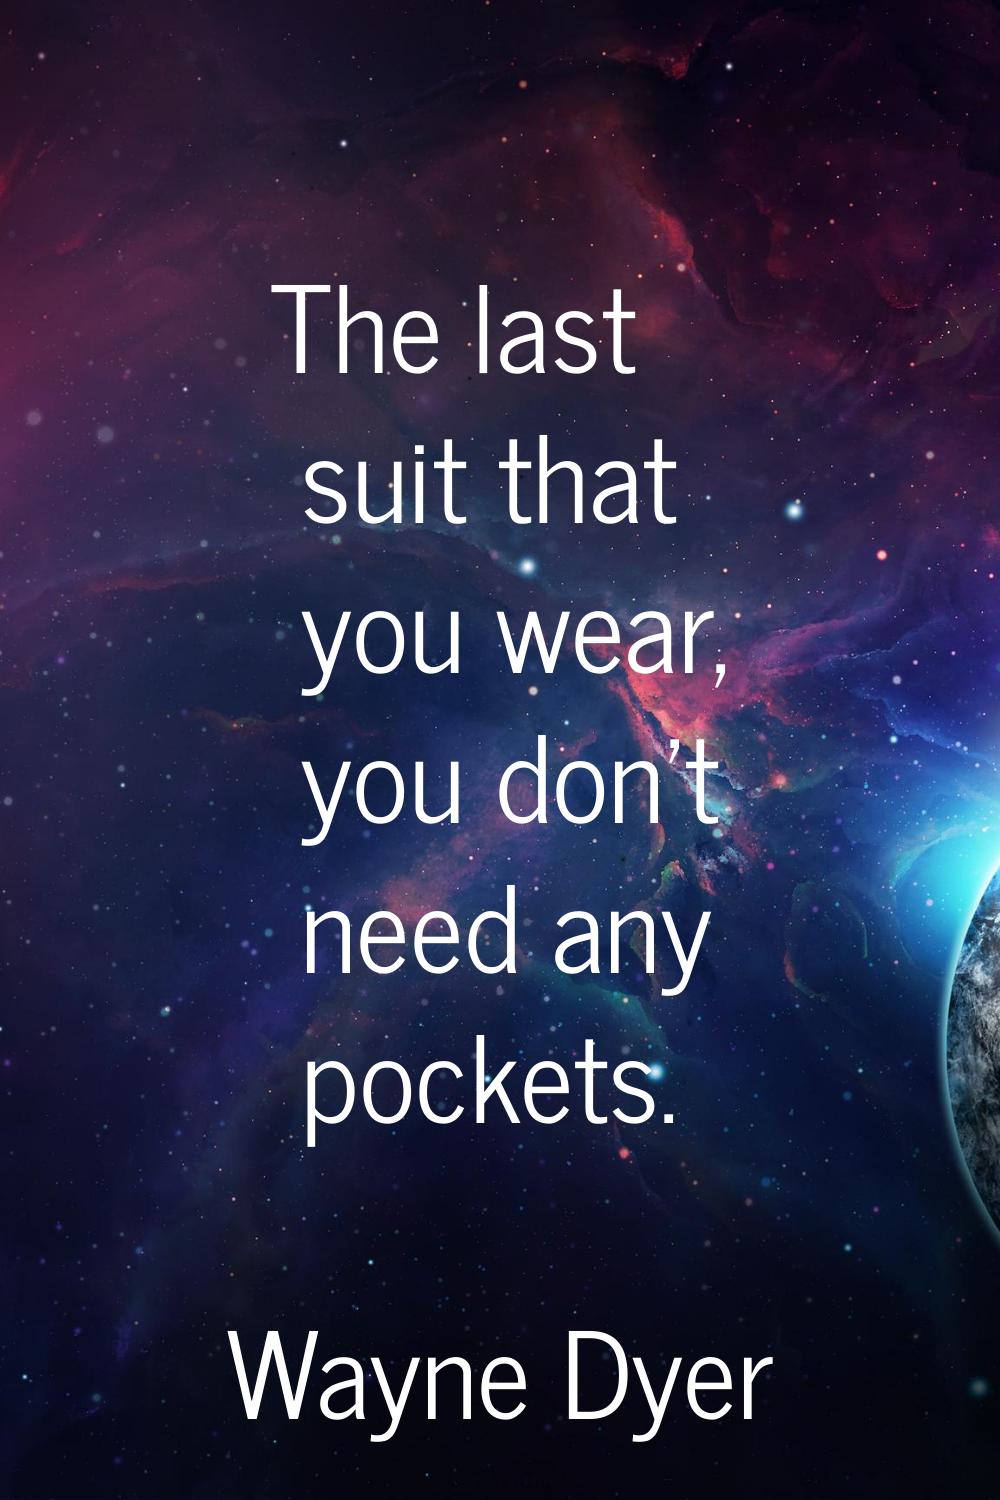 The last suit that you wear, you don't need any pockets.